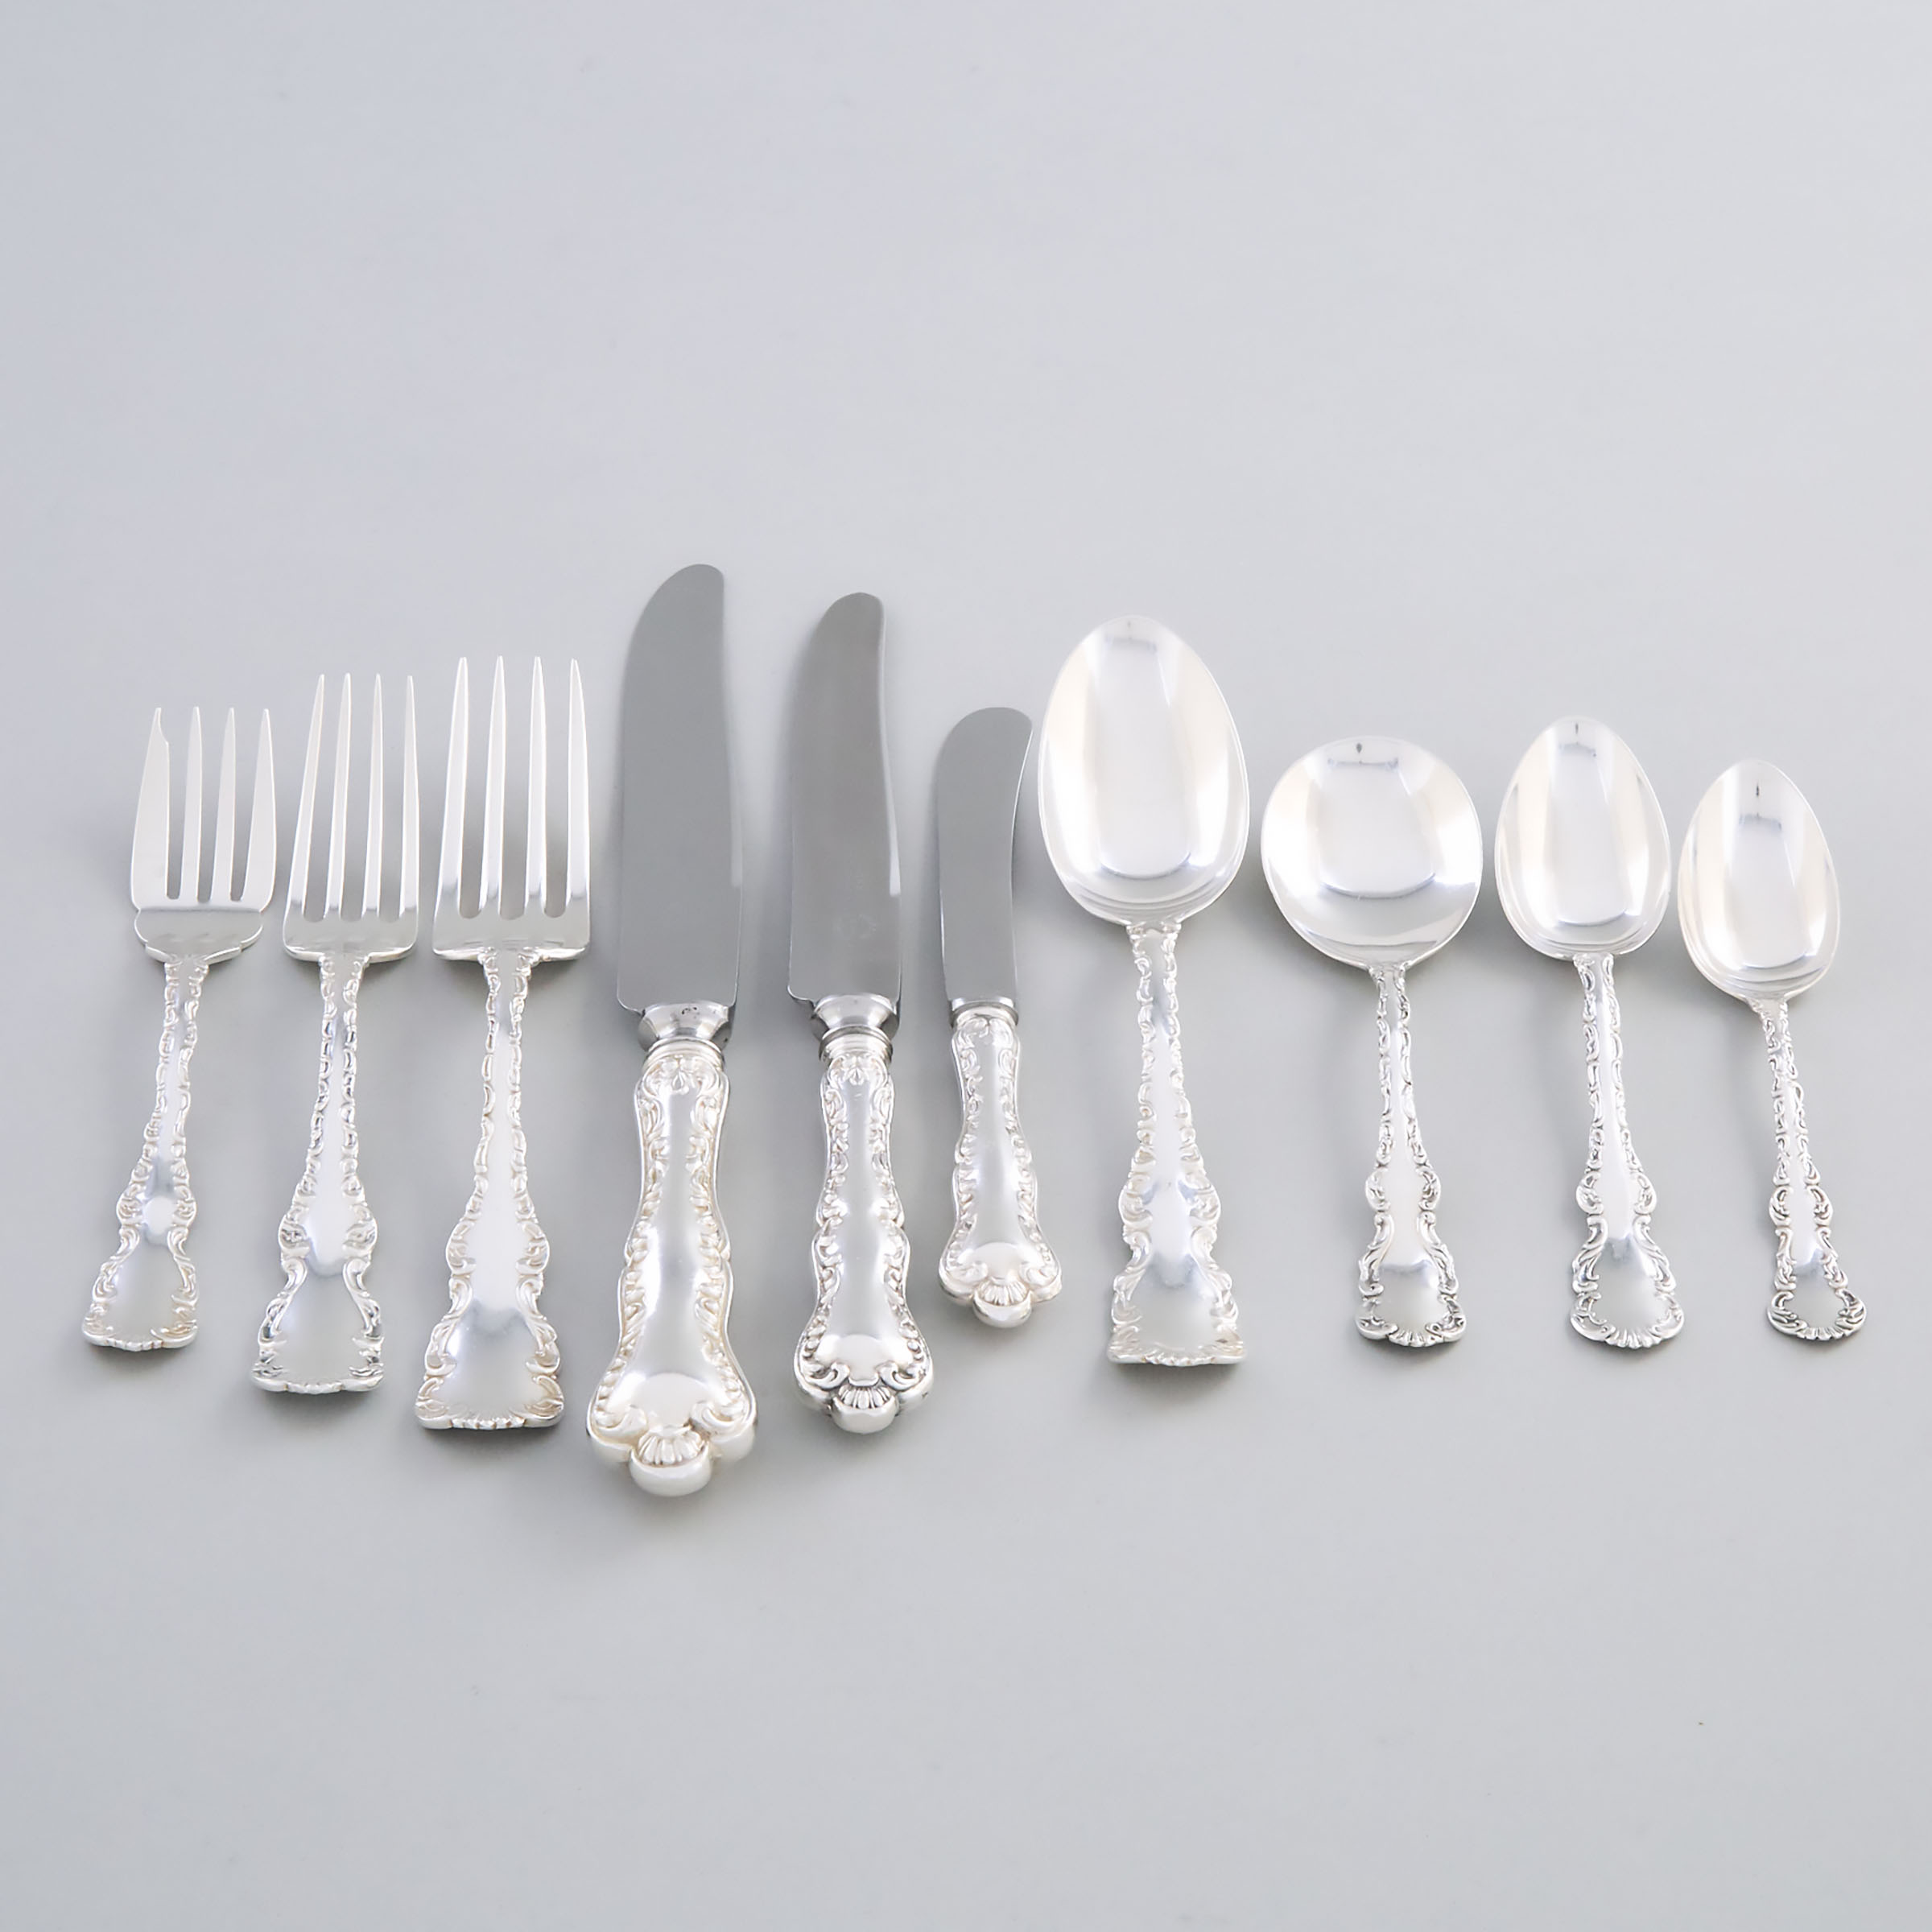 Canadian Silver 'Louis XV' Pattern Flatware Service, mainly Henry Birks & Sons, Montreal, Que., 20th century